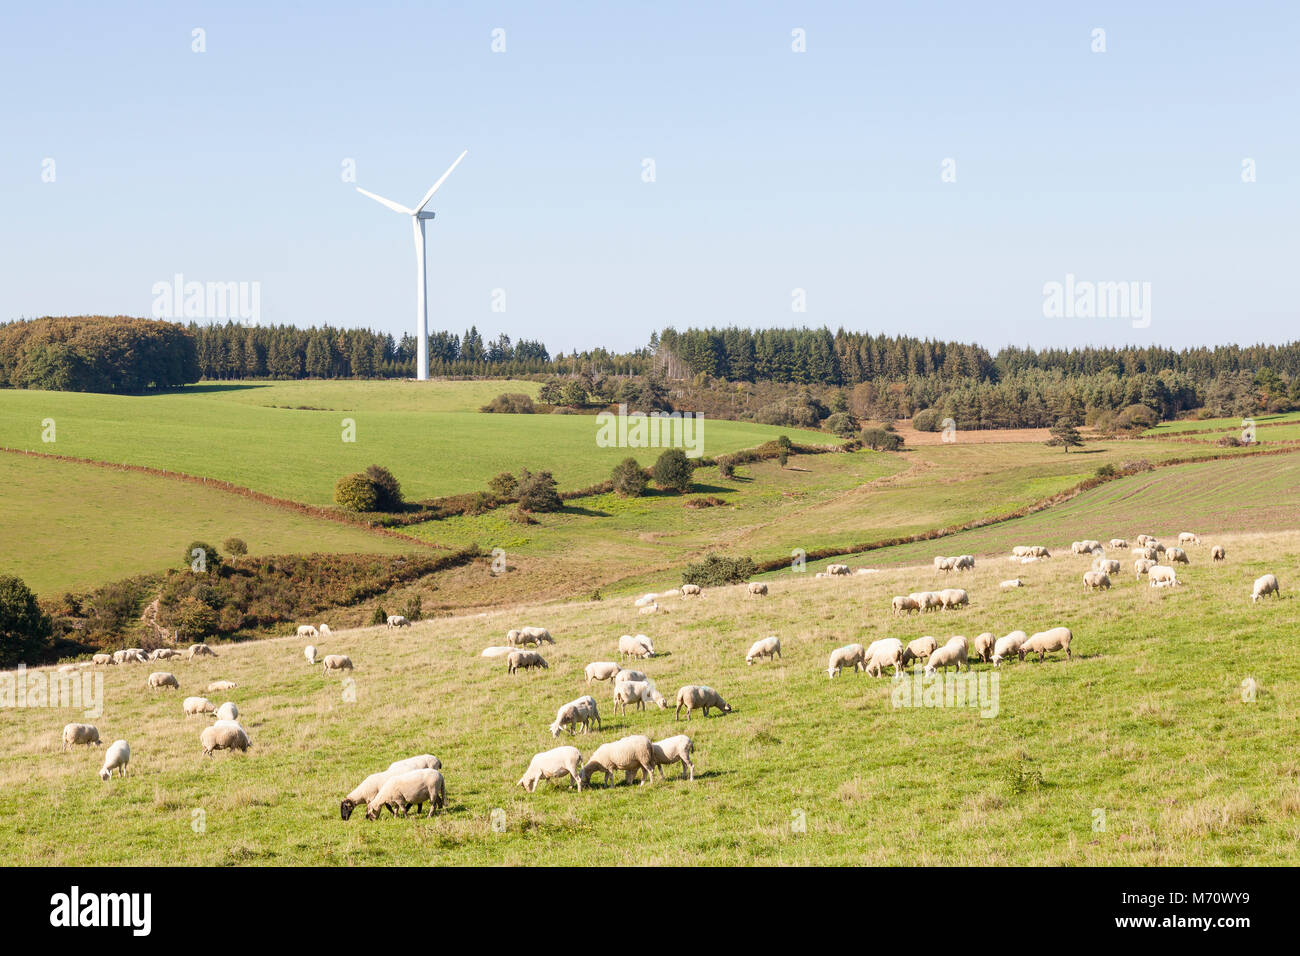 Flock of sheep grazing near a wind turbine in wooded countryside. Sustainable use of natural resources for power, energy and agriculture Stock Photo